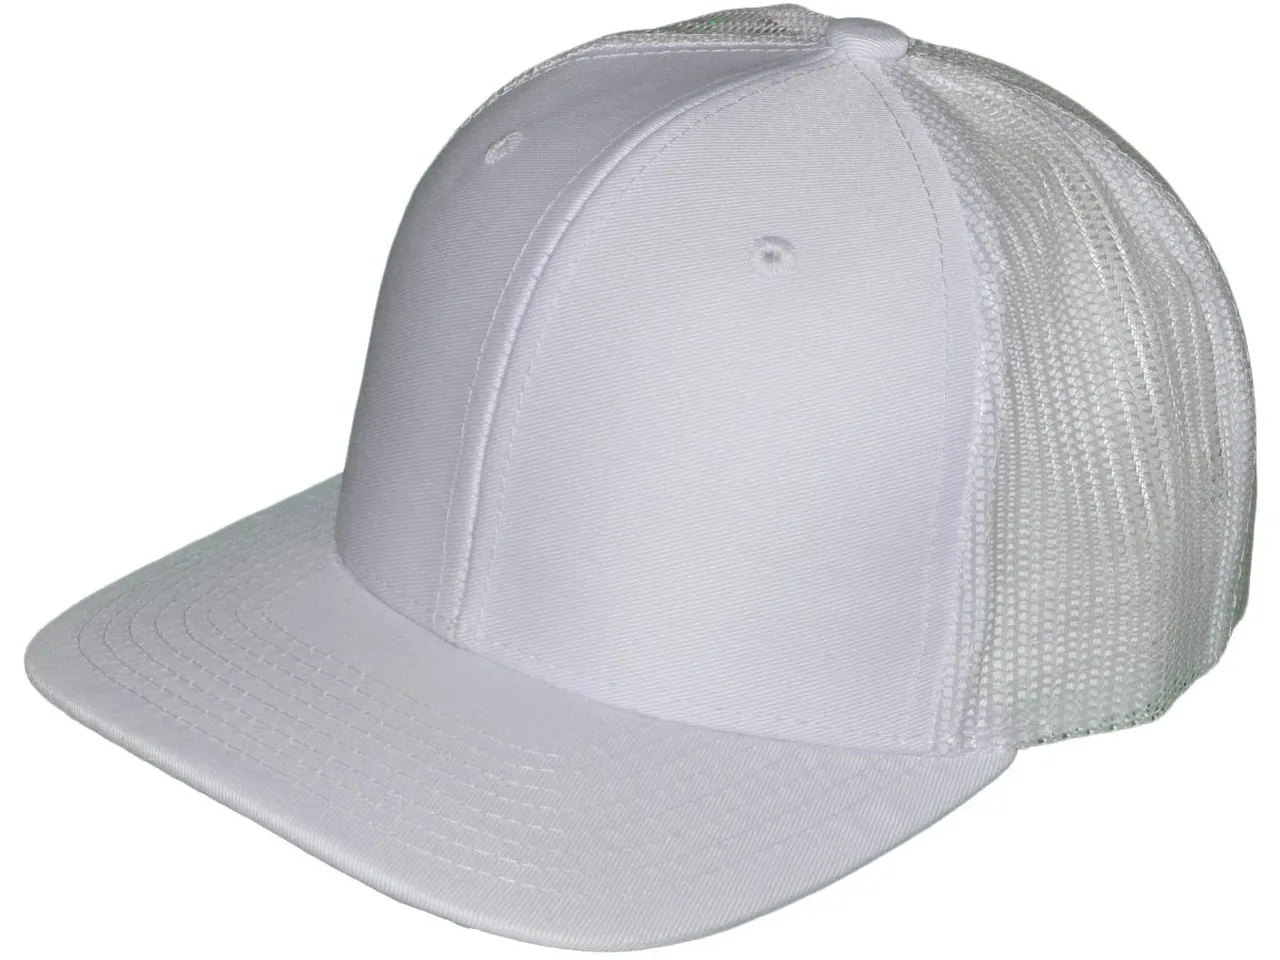 Classic Plain Trucker Hats With A Slightly Curved Bill,6 Panel Snapback ...